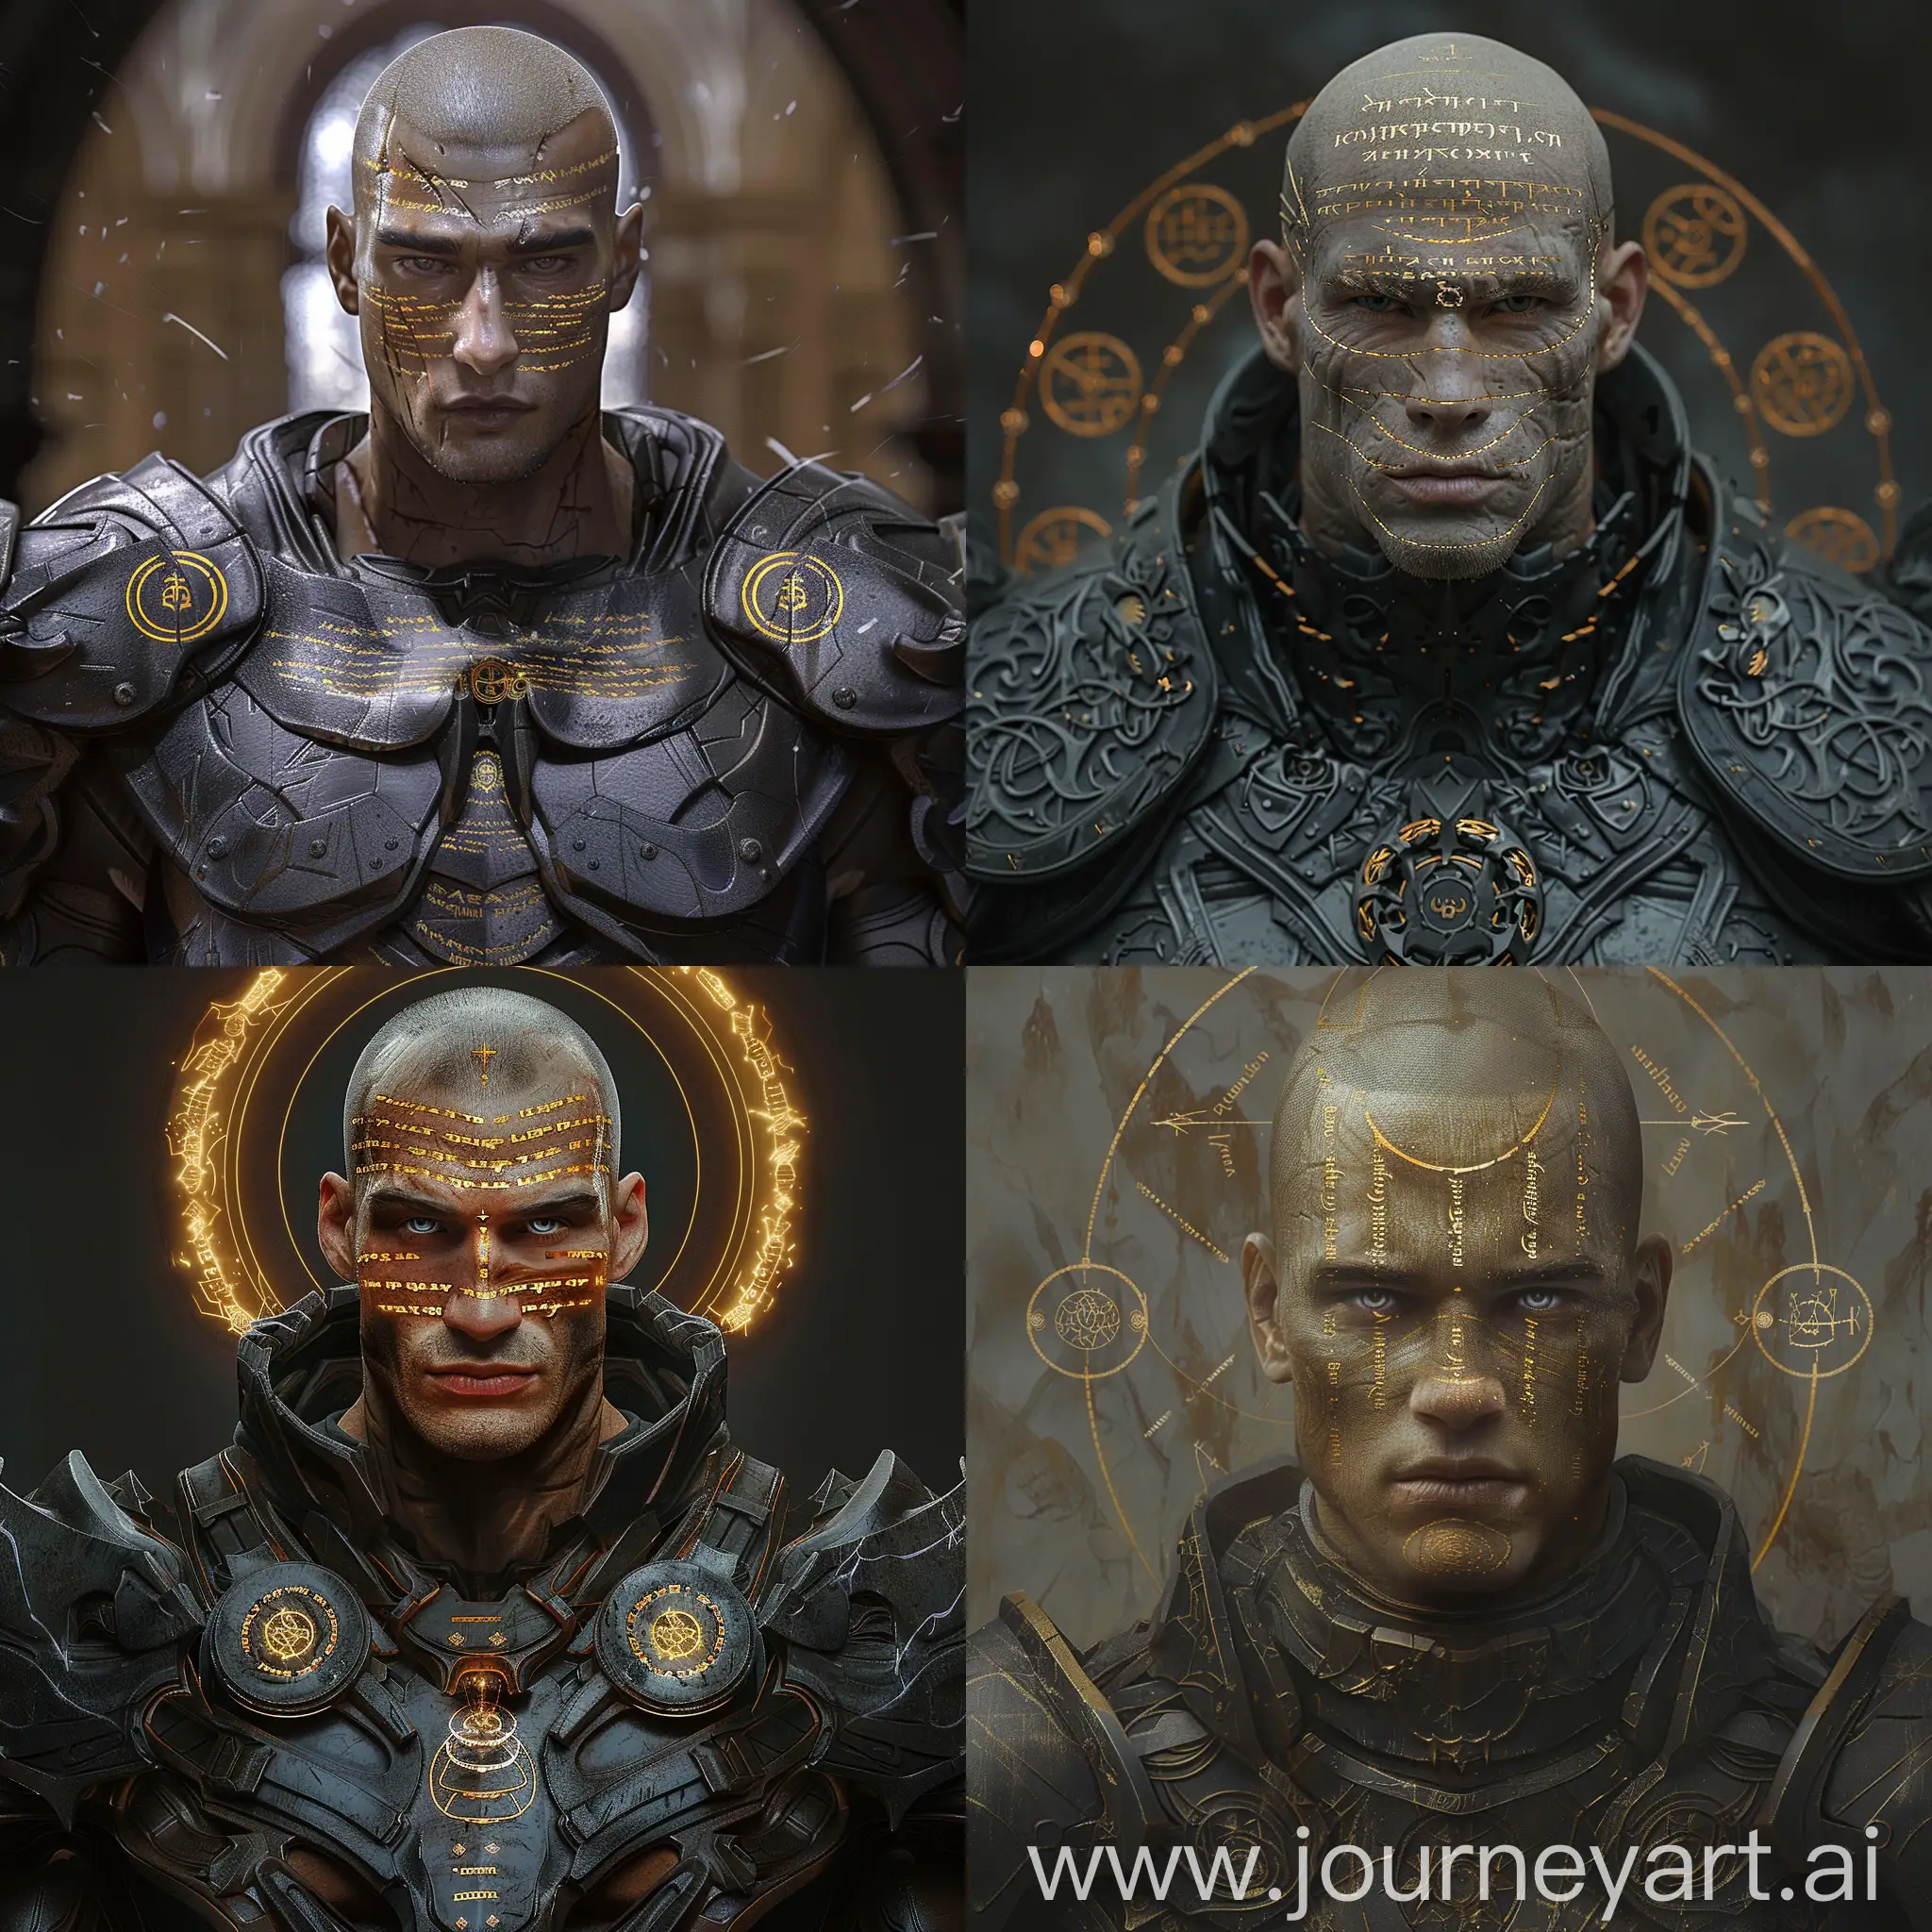 sigma european man with perfect face features, golden tanned skin, lines of golden text on his face, muscular, completely bald and shaved, grey eyes, chaos lord, dark  apostle, massive chaos corrupted armor, circle runes engraved on armor, purity seals, chaos halo.